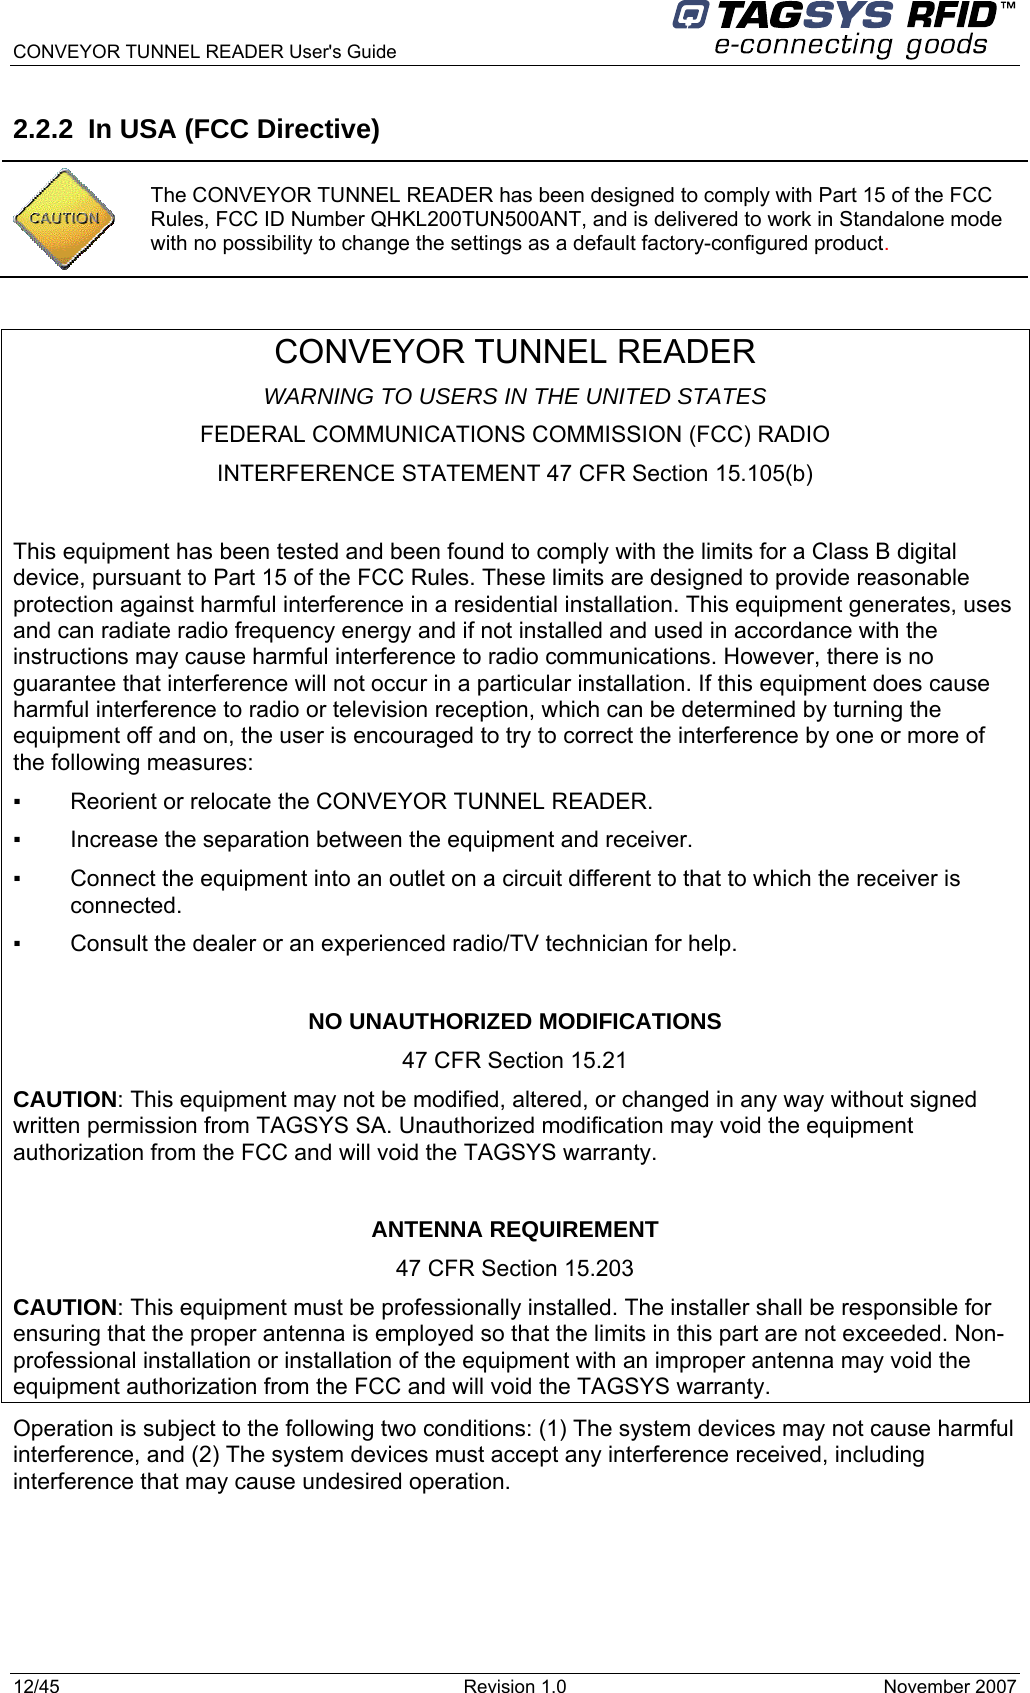  CONVEYOR TUNNEL READER User&apos;s Guide 12/45  Revision 1.0  November 2007  2.2.2  In USA (FCC Directive)  CONVEYOR TUNNEL READER WARNING TO USERS IN THE UNITED STATES FEDERAL COMMUNICATIONS COMMISSION (FCC) RADIO INTERFERENCE STATEMENT 47 CFR Section 15.105(b)  This equipment has been tested and been found to comply with the limits for a Class B digital device, pursuant to Part 15 of the FCC Rules. These limits are designed to provide reasonable protection against harmful interference in a residential installation. This equipment generates, uses and can radiate radio frequency energy and if not installed and used in accordance with the instructions may cause harmful interference to radio communications. However, there is no guarantee that interference will not occur in a particular installation. If this equipment does cause harmful interference to radio or television reception, which can be determined by turning the equipment off and on, the user is encouraged to try to correct the interference by one or more of the following measures:  ▪   Reorient or relocate the CONVEYOR TUNNEL READER. ▪   Increase the separation between the equipment and receiver. ▪   Connect the equipment into an outlet on a circuit different to that to which the receiver is connected. ▪   Consult the dealer or an experienced radio/TV technician for help.  NO UNAUTHORIZED MODIFICATIONS 47 CFR Section 15.21 CAUTION: This equipment may not be modified, altered, or changed in any way without signed written permission from TAGSYS SA. Unauthorized modification may void the equipment authorization from the FCC and will void the TAGSYS warranty.  ANTENNA REQUIREMENT 47 CFR Section 15.203 CAUTION: This equipment must be professionally installed. The installer shall be responsible for ensuring that the proper antenna is employed so that the limits in this part are not exceeded. Non-professional installation or installation of the equipment with an improper antenna may void the equipment authorization from the FCC and will void the TAGSYS warranty. Operation is subject to the following two conditions: (1) The system devices may not cause harmful interference, and (2) The system devices must accept any interference received, including interference that may cause undesired operation.  The CONVEYOR TUNNEL READER has been designed to comply with Part 15 of the FCC Rules, FCC ID Number QHKL200TUN500ANT, and is delivered to work in Standalone mode with no possibility to change the settings as a default factory-configured product. 